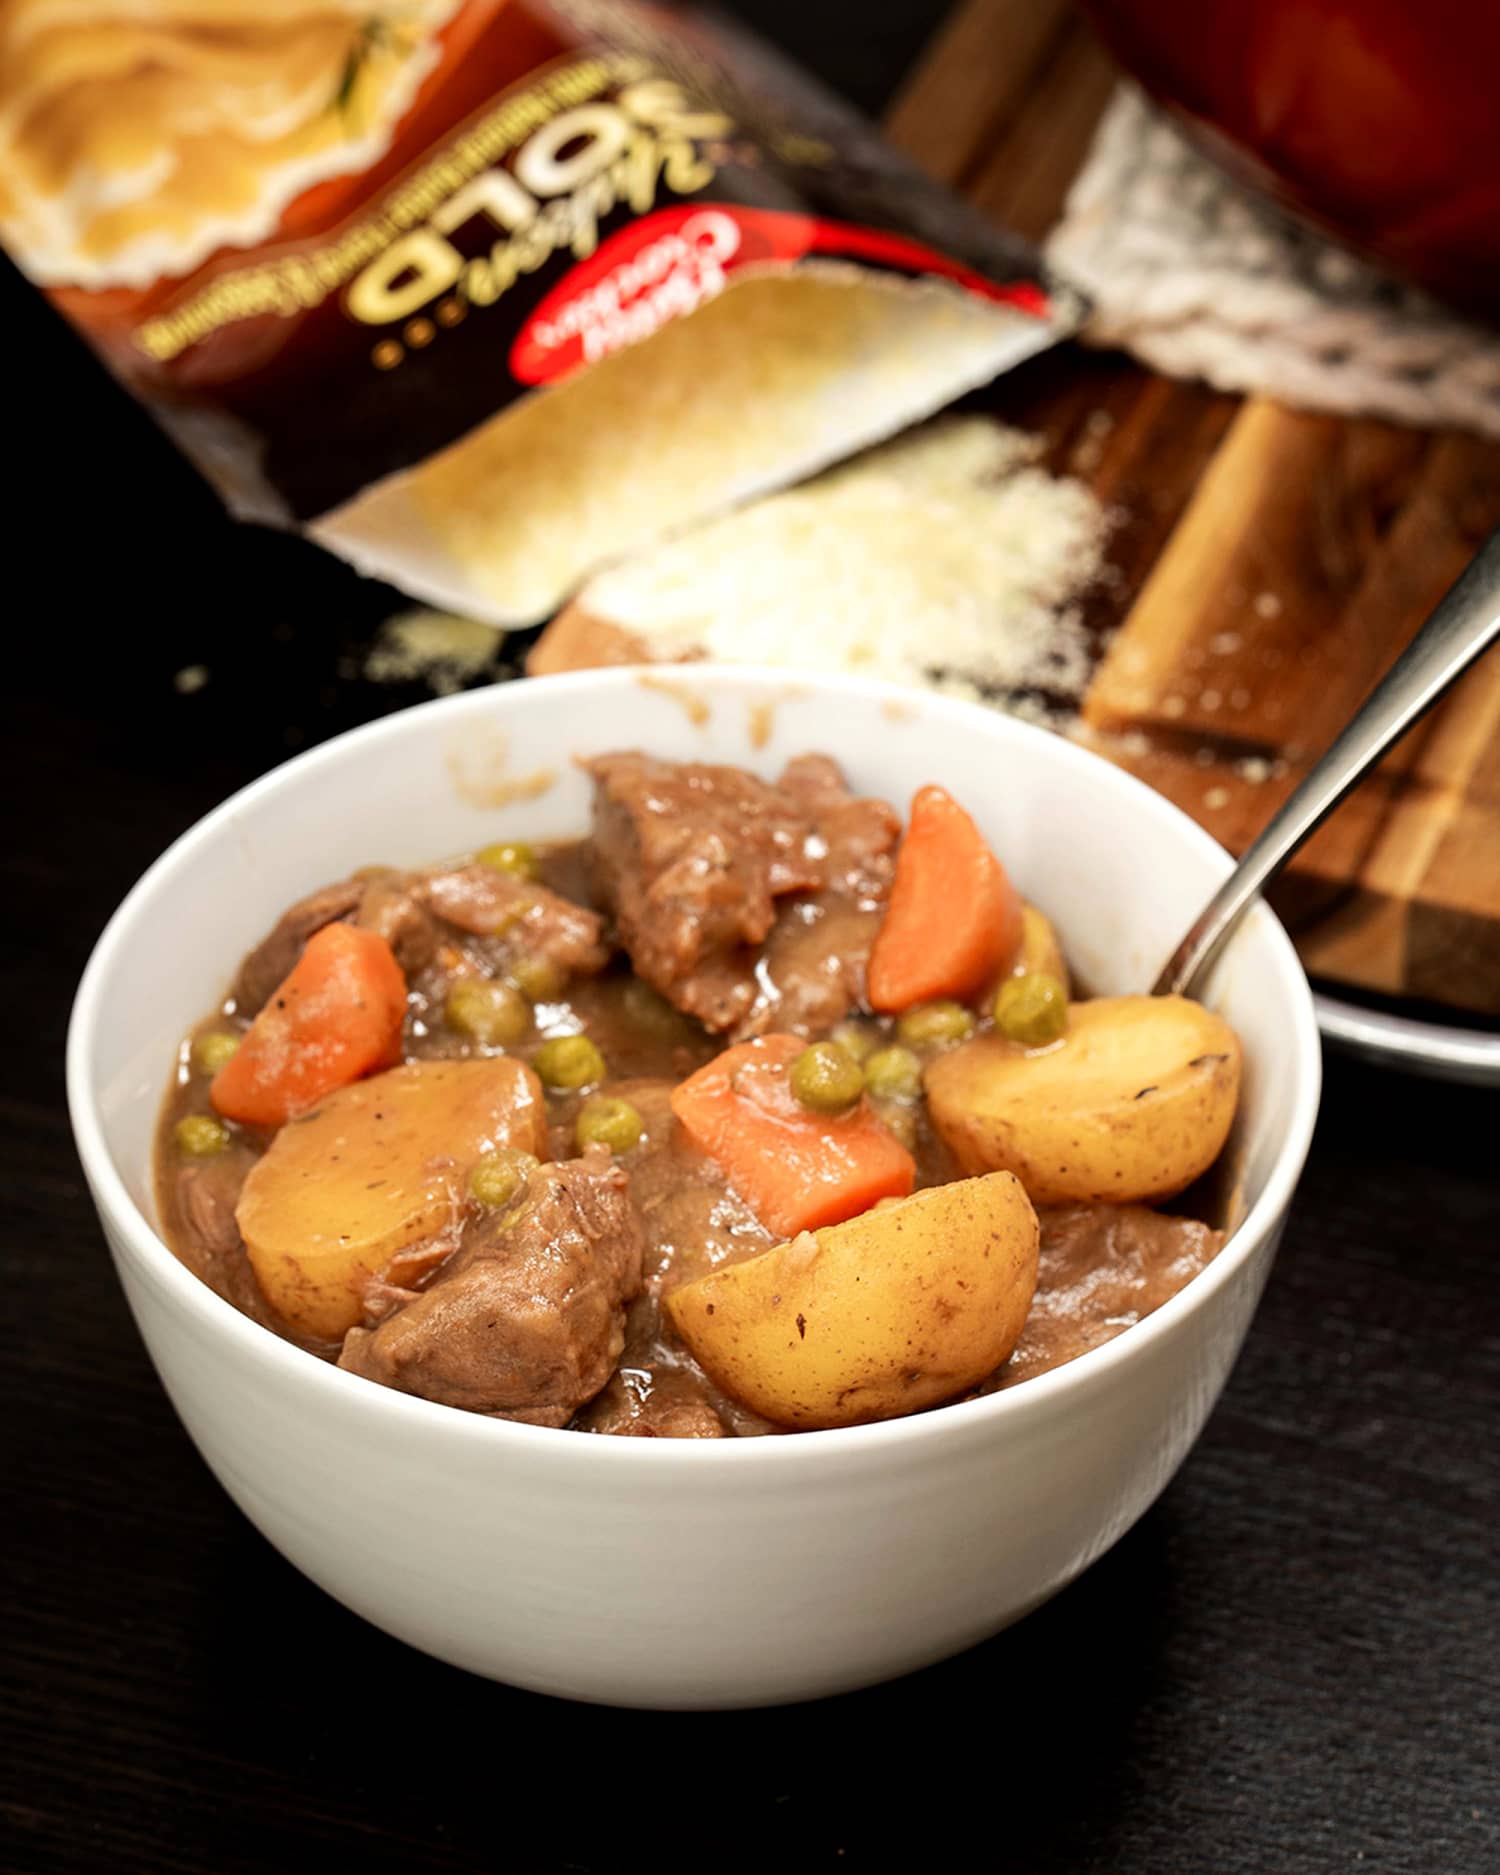 I Tried the Viral Method for Thickening Stew Without Cornstarch and It Works Like a Charm